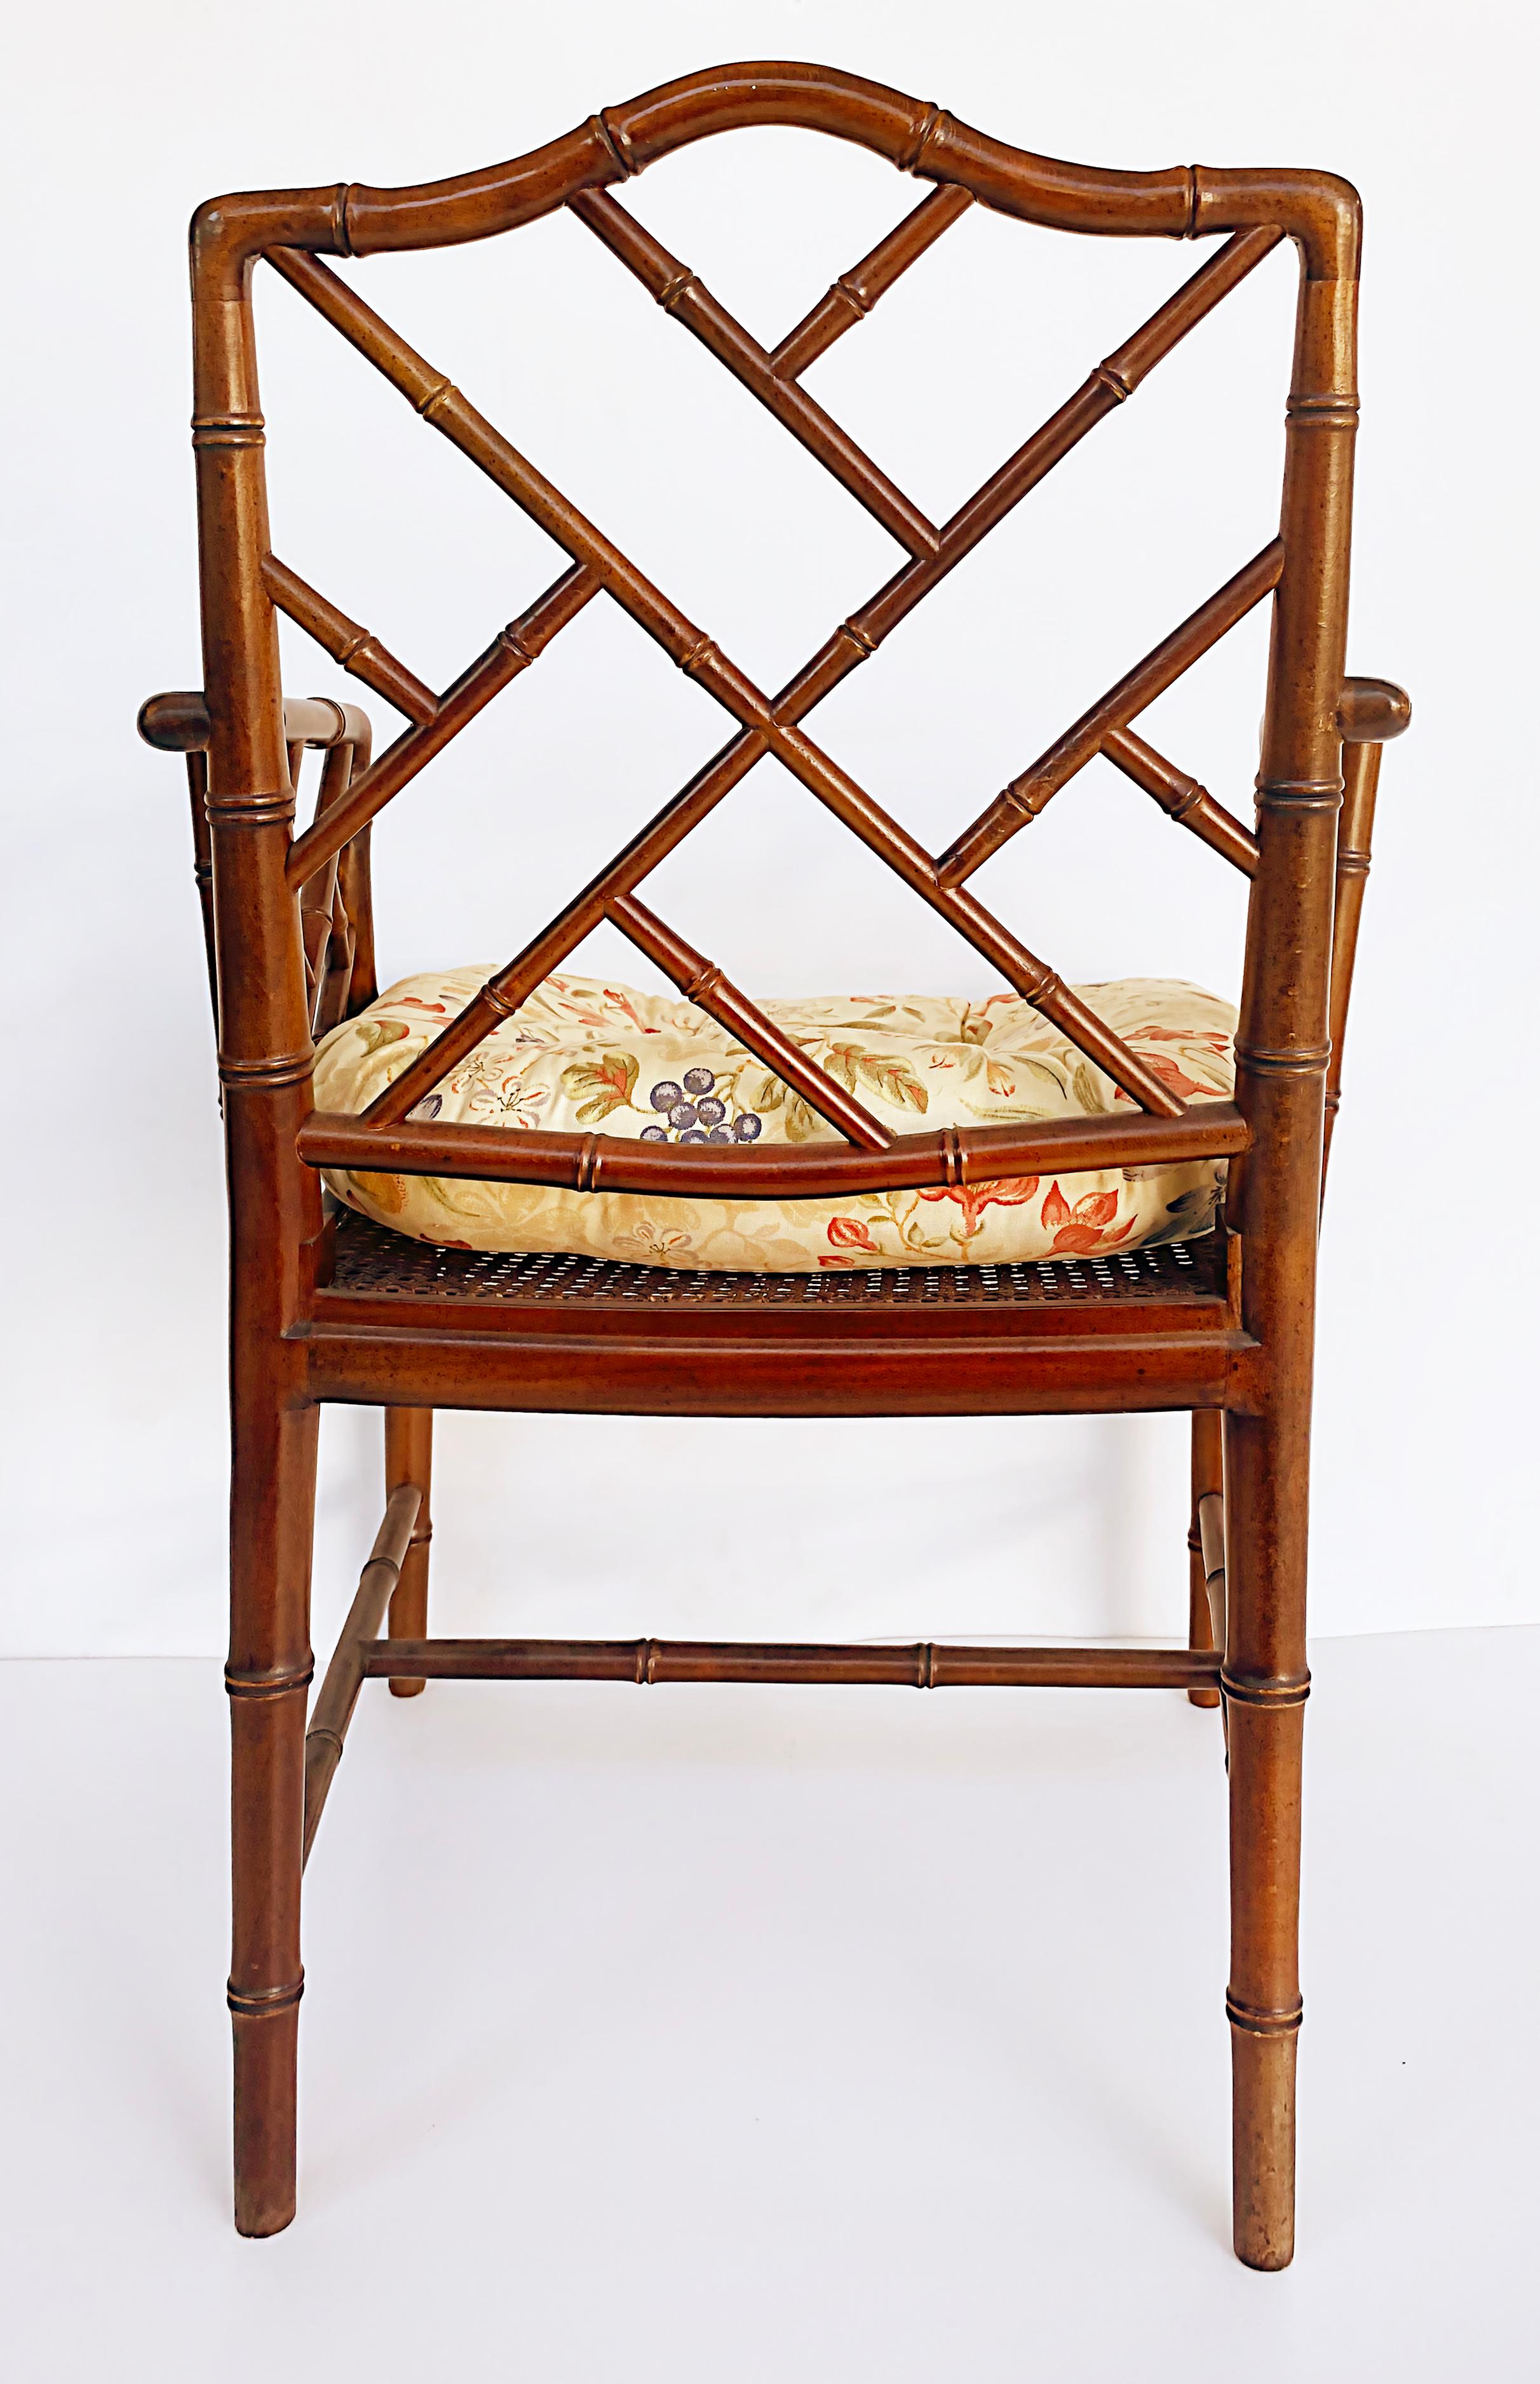 Chinese Chippendale Style Faux Bamboo Armchair, Caned Seat, Loose Seat Cushion In Good Condition For Sale In Miami, FL